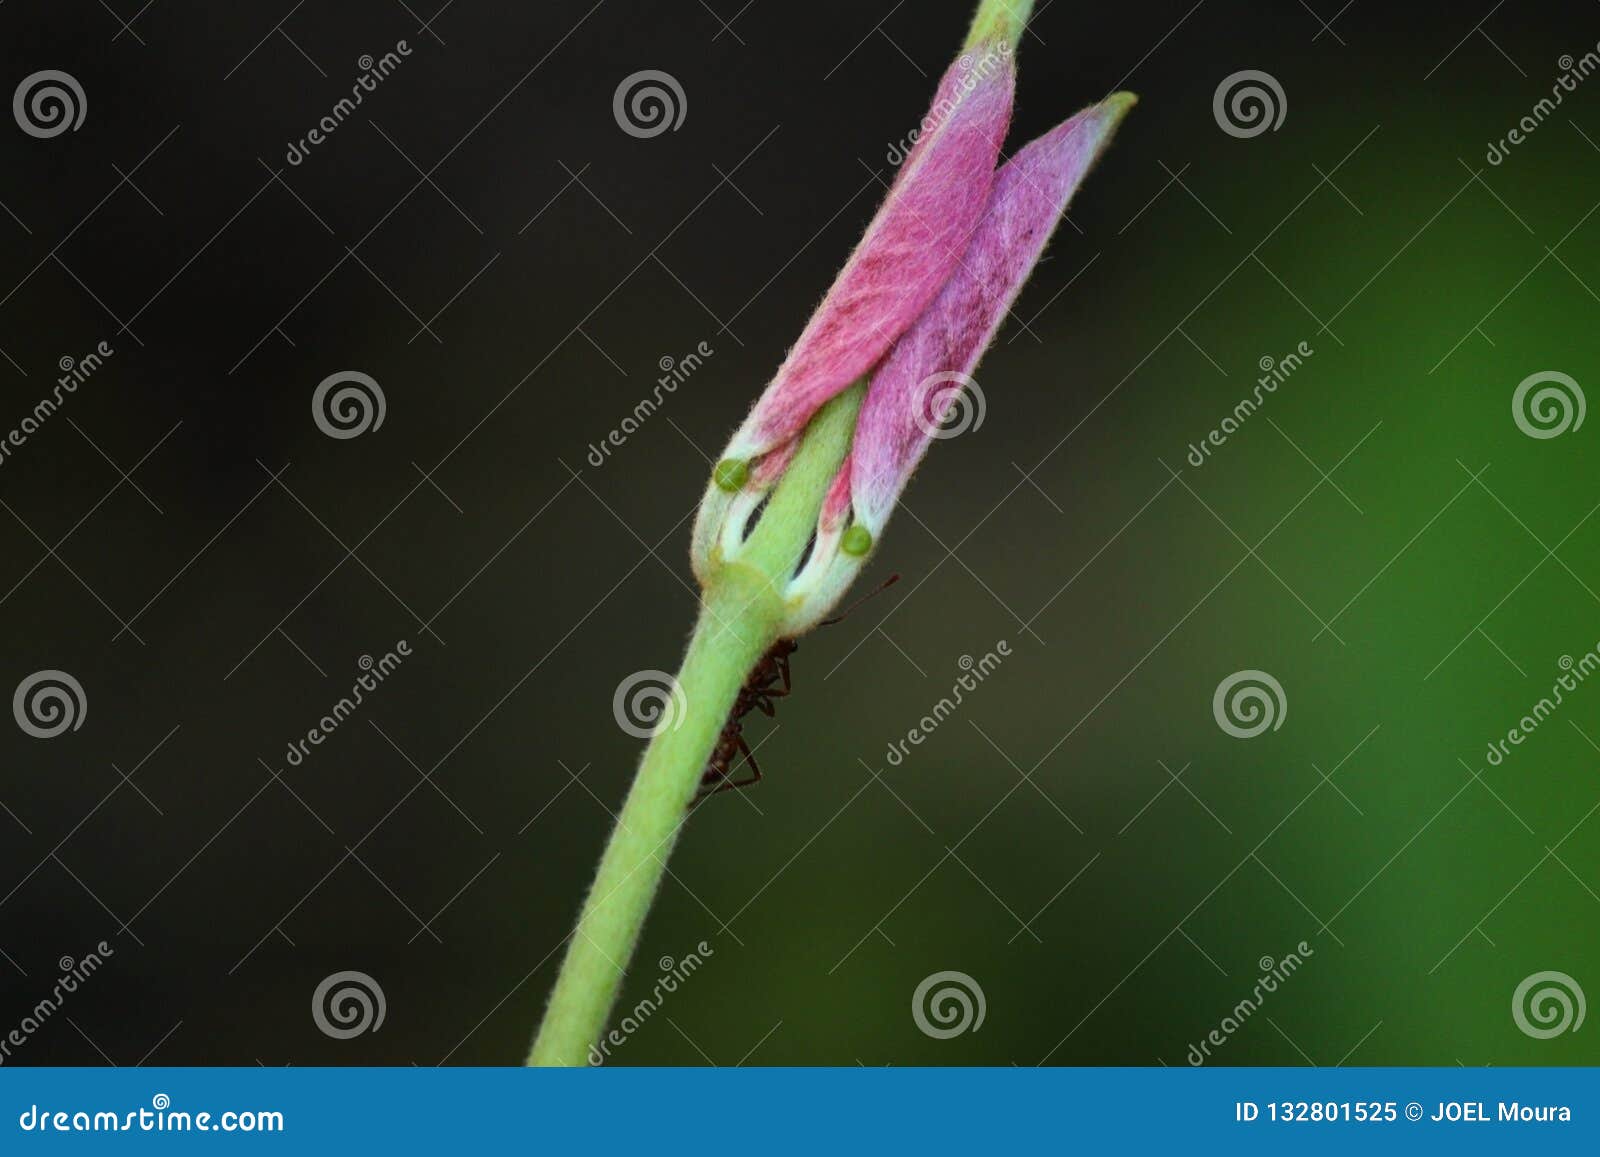 Ant in flower stock image. Image of veadeiros, animals - 132801525